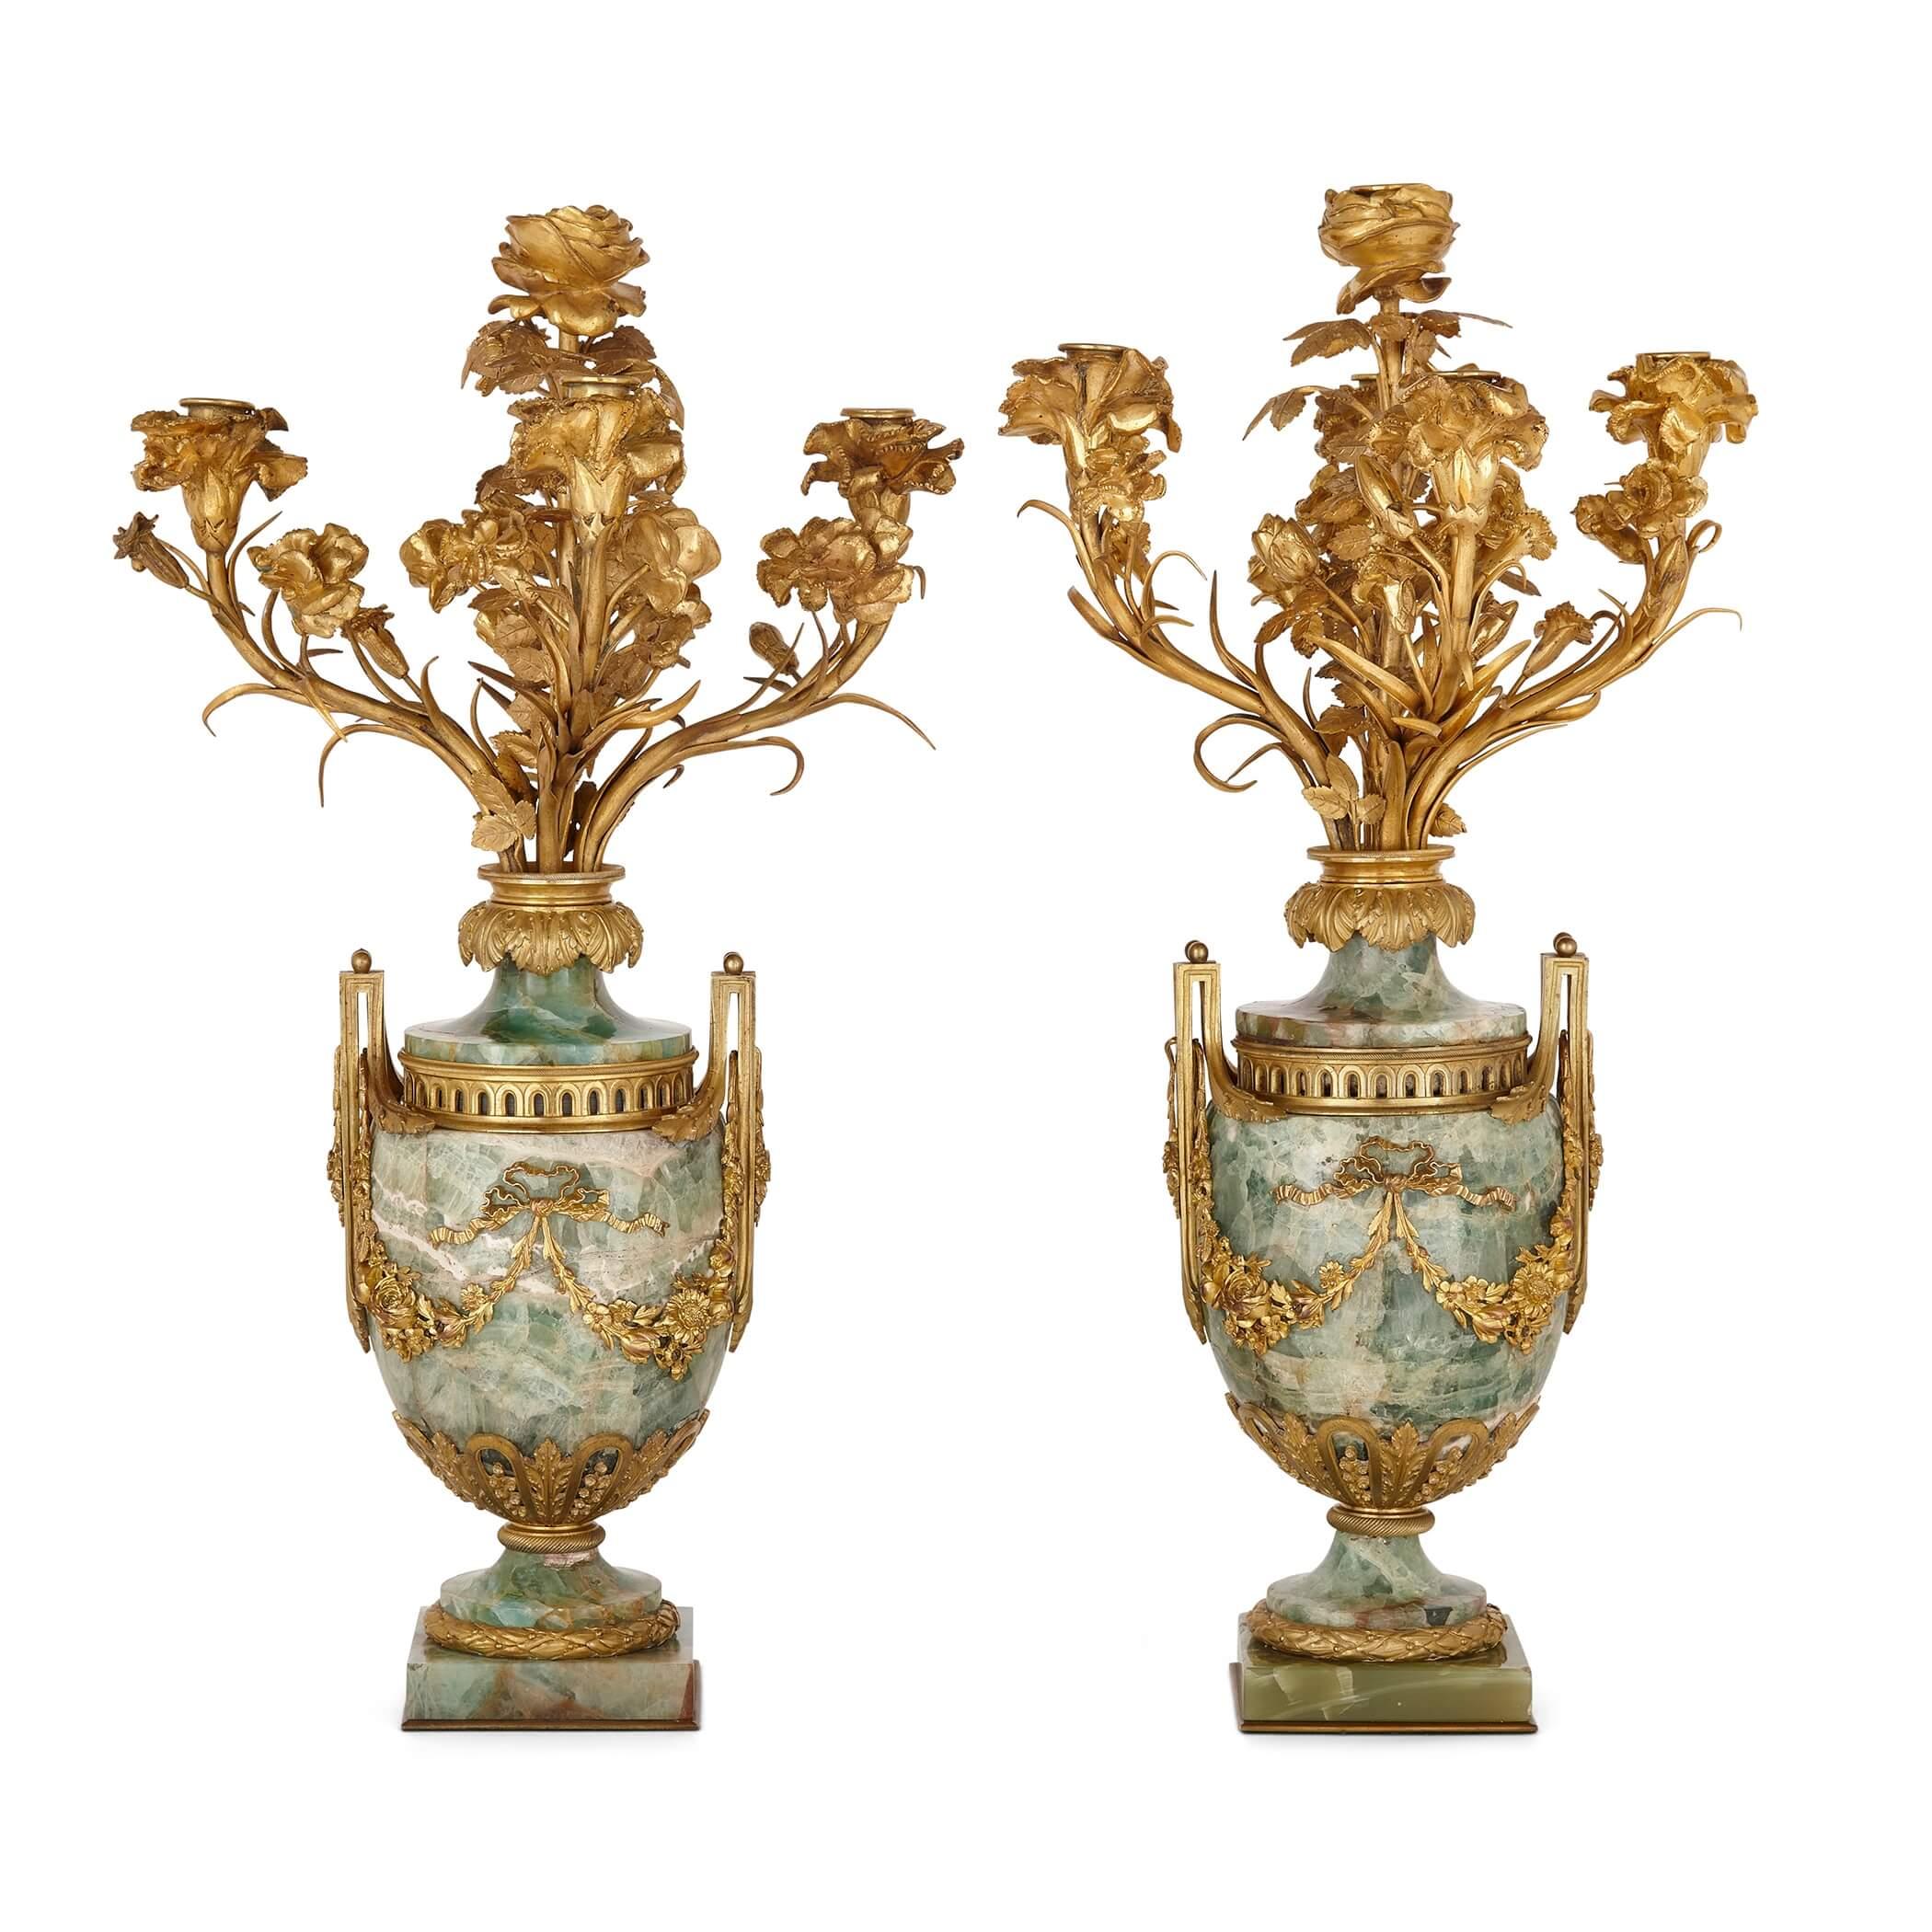 Pair of large Louis XVI style gilt bronze mounted fluorspar candelabra
French, 19th Century
Measures: Height 61cm, width 35cm, depth 34cm

Crafted in fine Neoclassical and Louis XVI style, these beautiful candelabra are made from the rare and